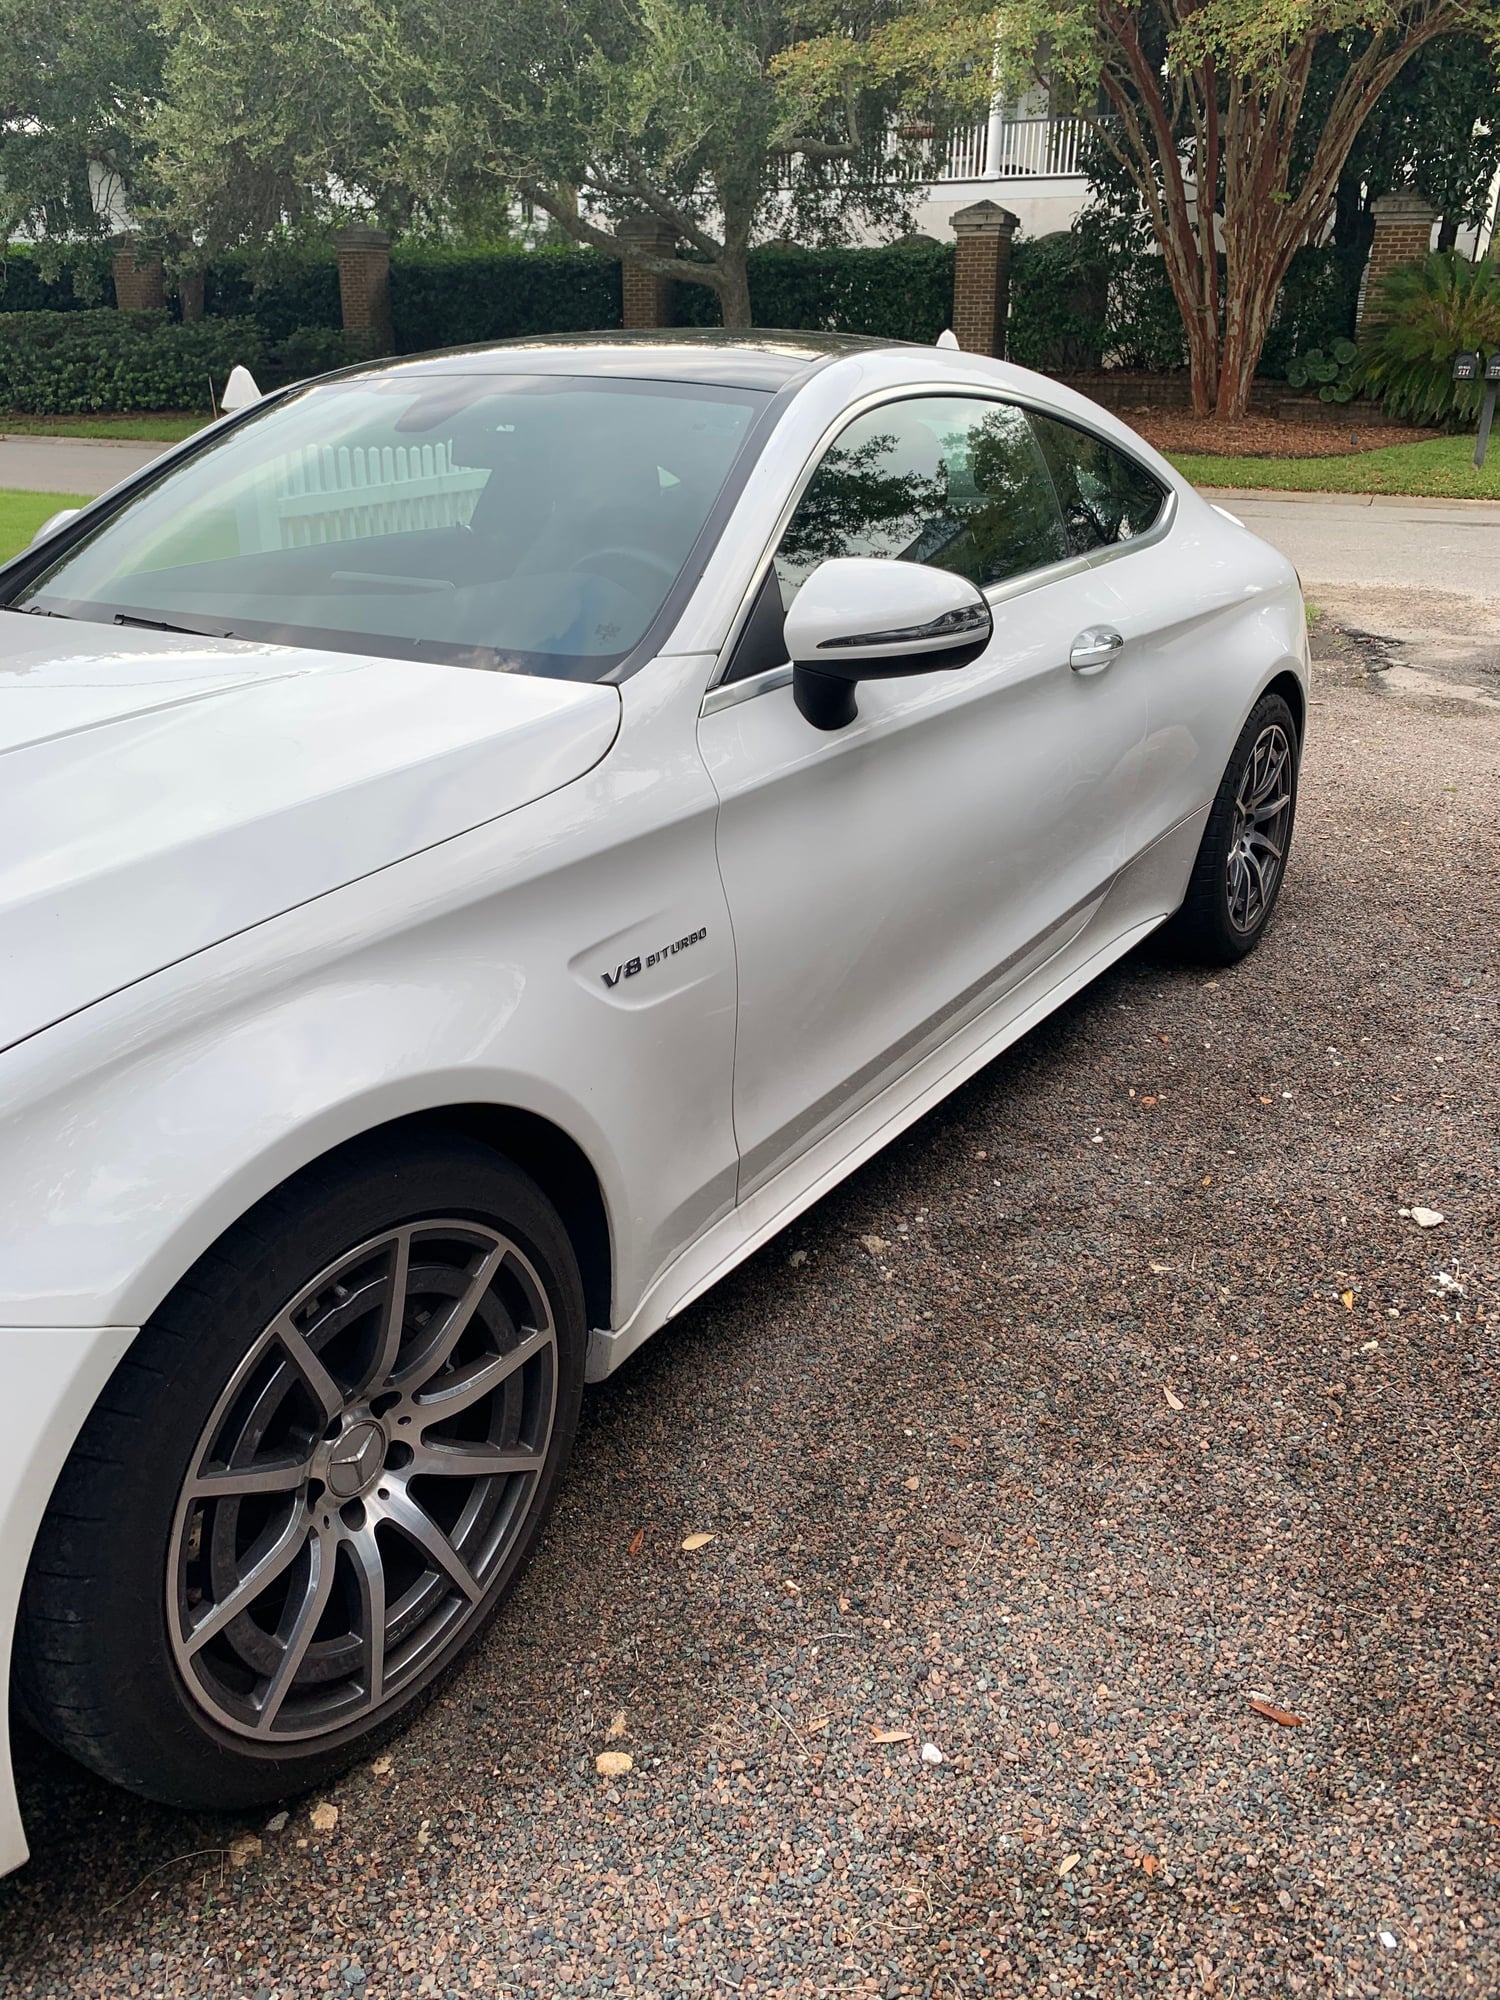 2020 Mercedes-Benz C63 AMG - 2020 C63 Coupe 7k miles. Super clean. - Used - VIN WDDWJ8GB3LF94615 - 6,900 Miles - 8 cyl - 2WD - Automatic - White - Charleston, SC 29401, United States